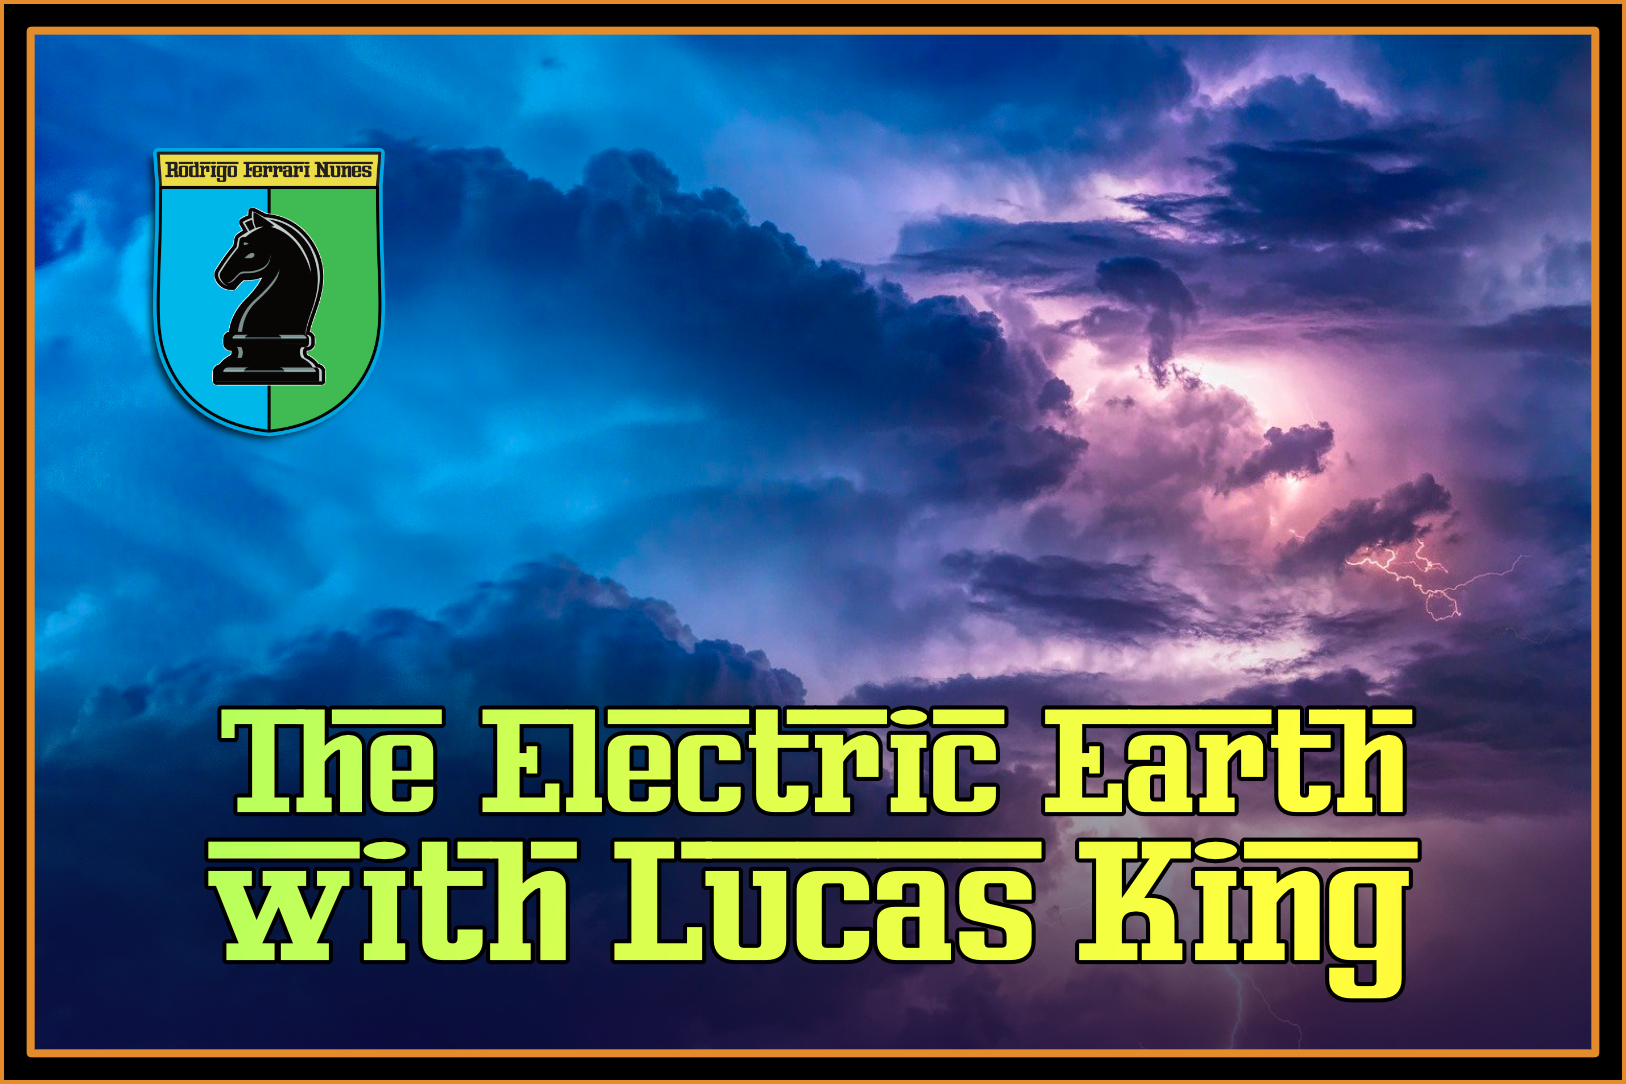 THE ELECTRIC EARTH WITH LUCAS KING + ELECTROMAGNETIC CHESS